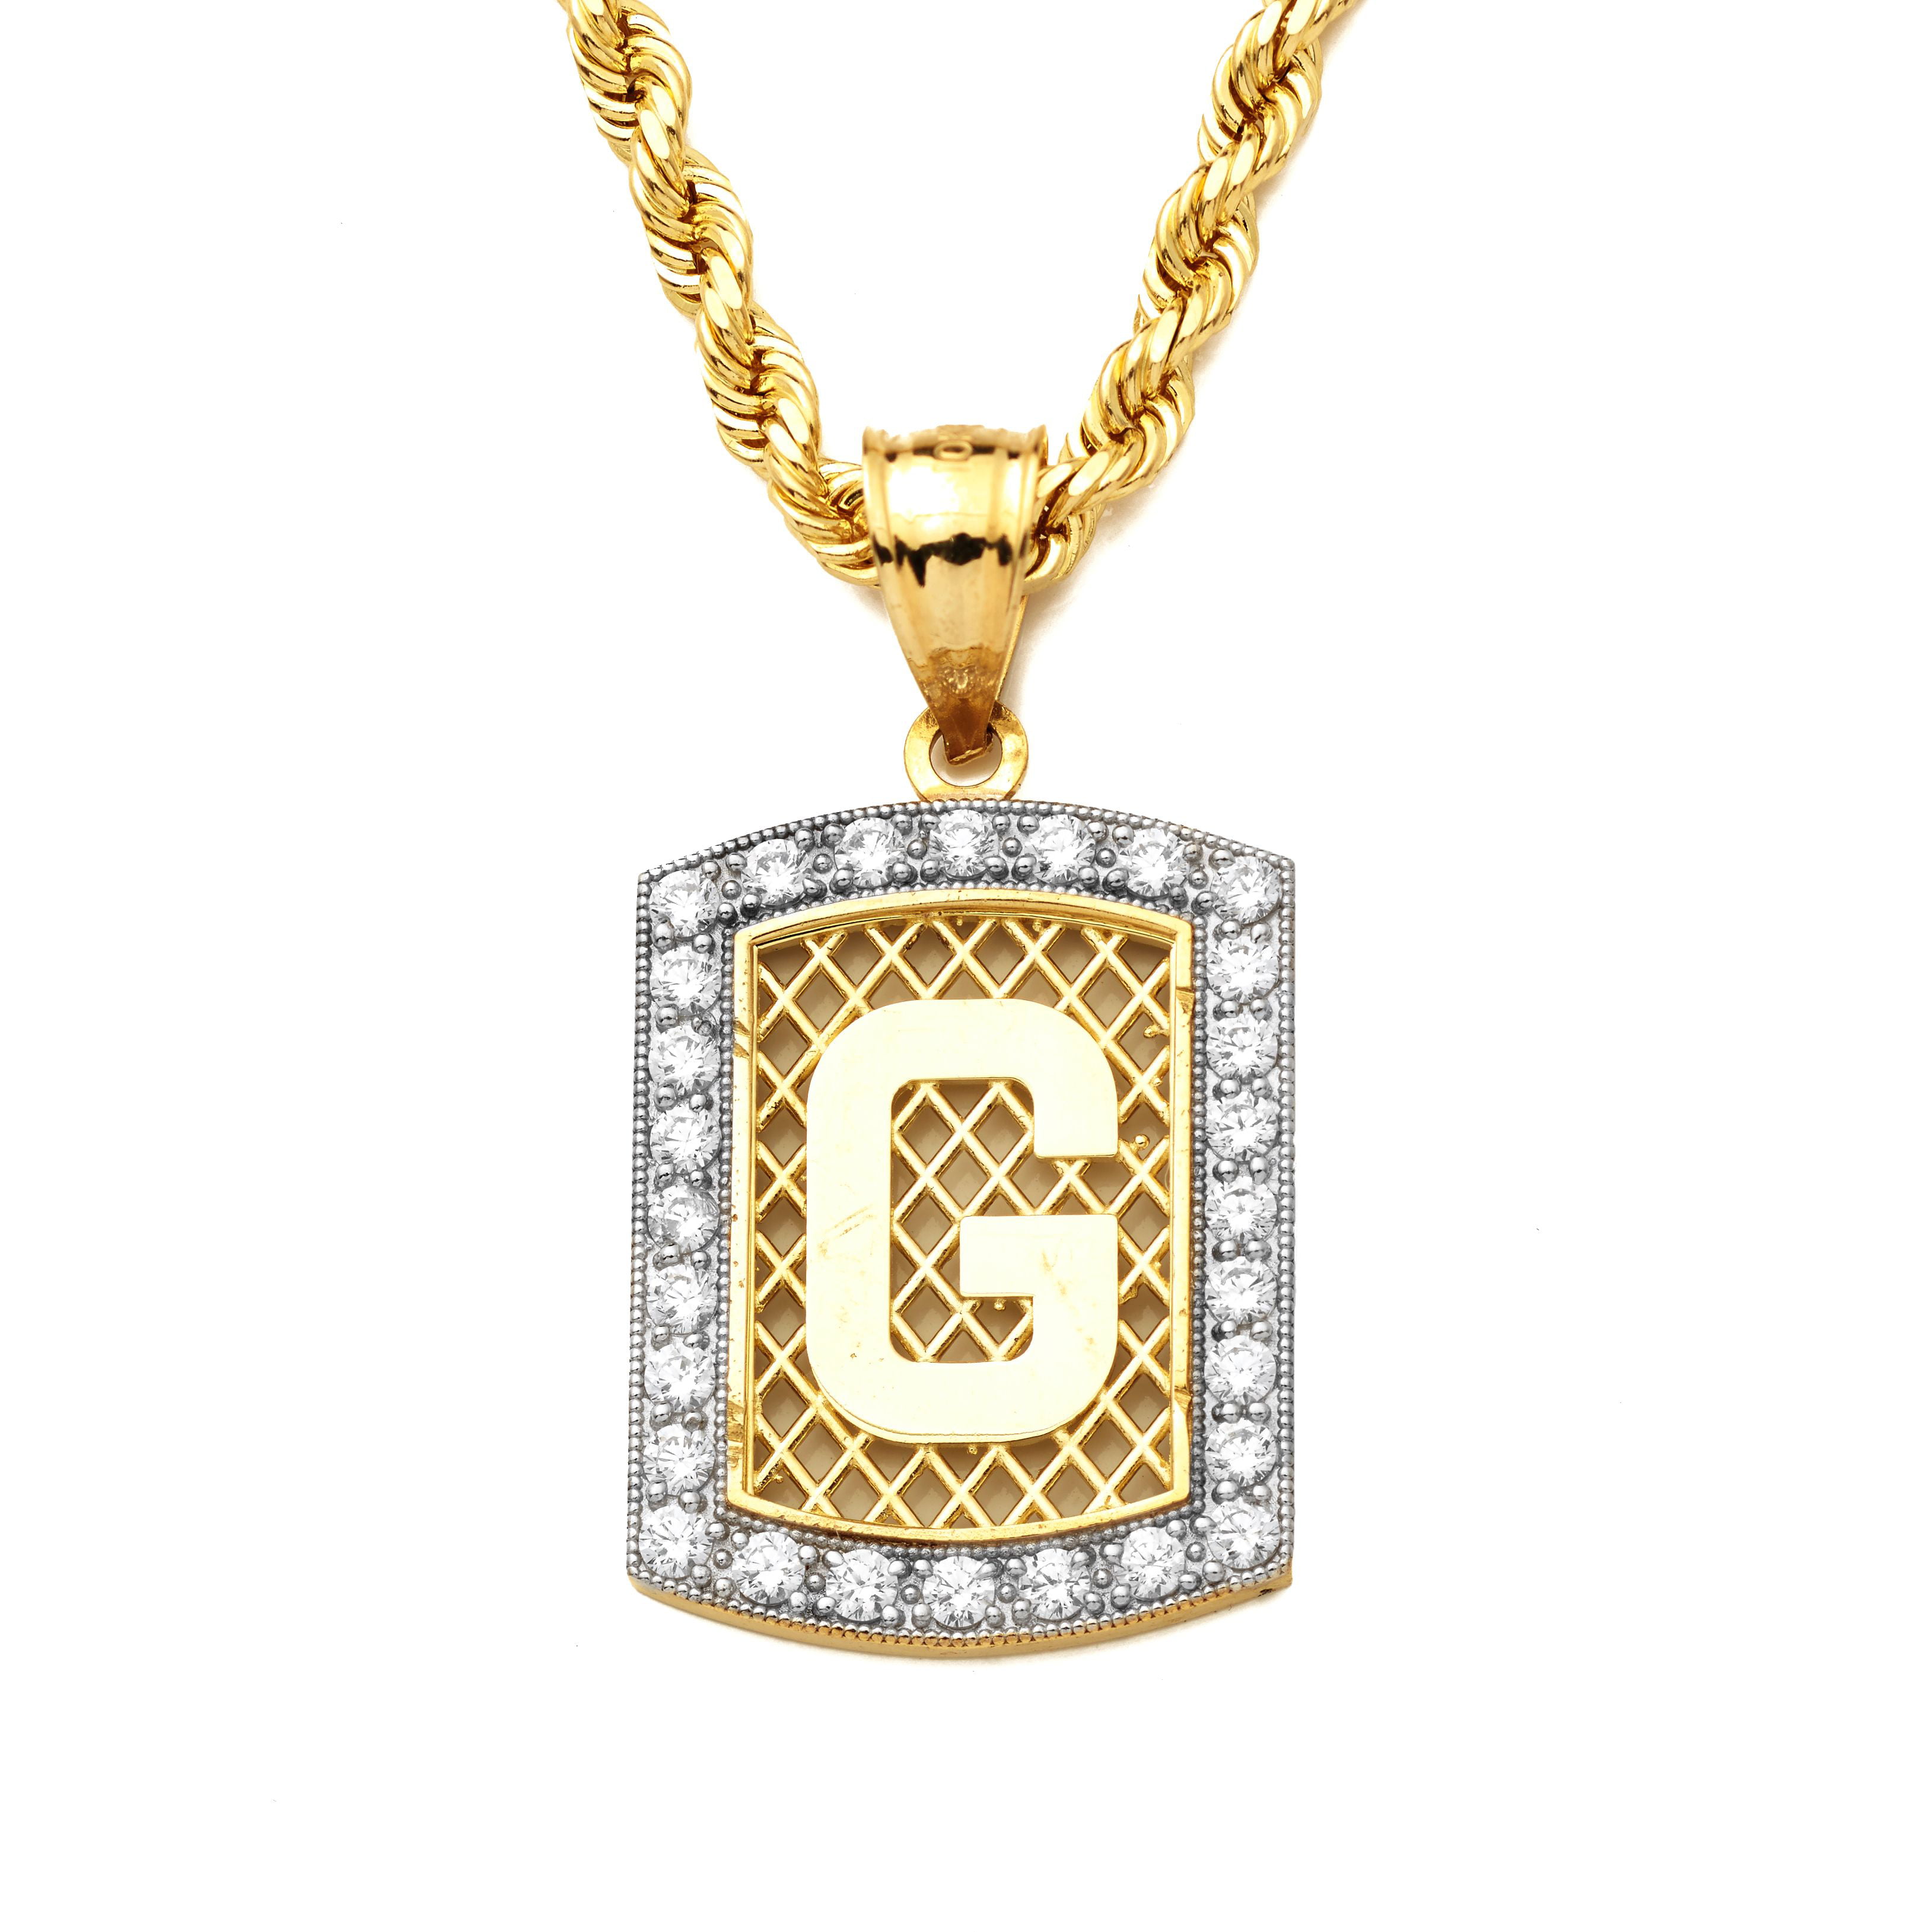 10K Yellow Gold Dog Tag Initials Charm Pendant w/CZ Border (Available from A-Z) (G)